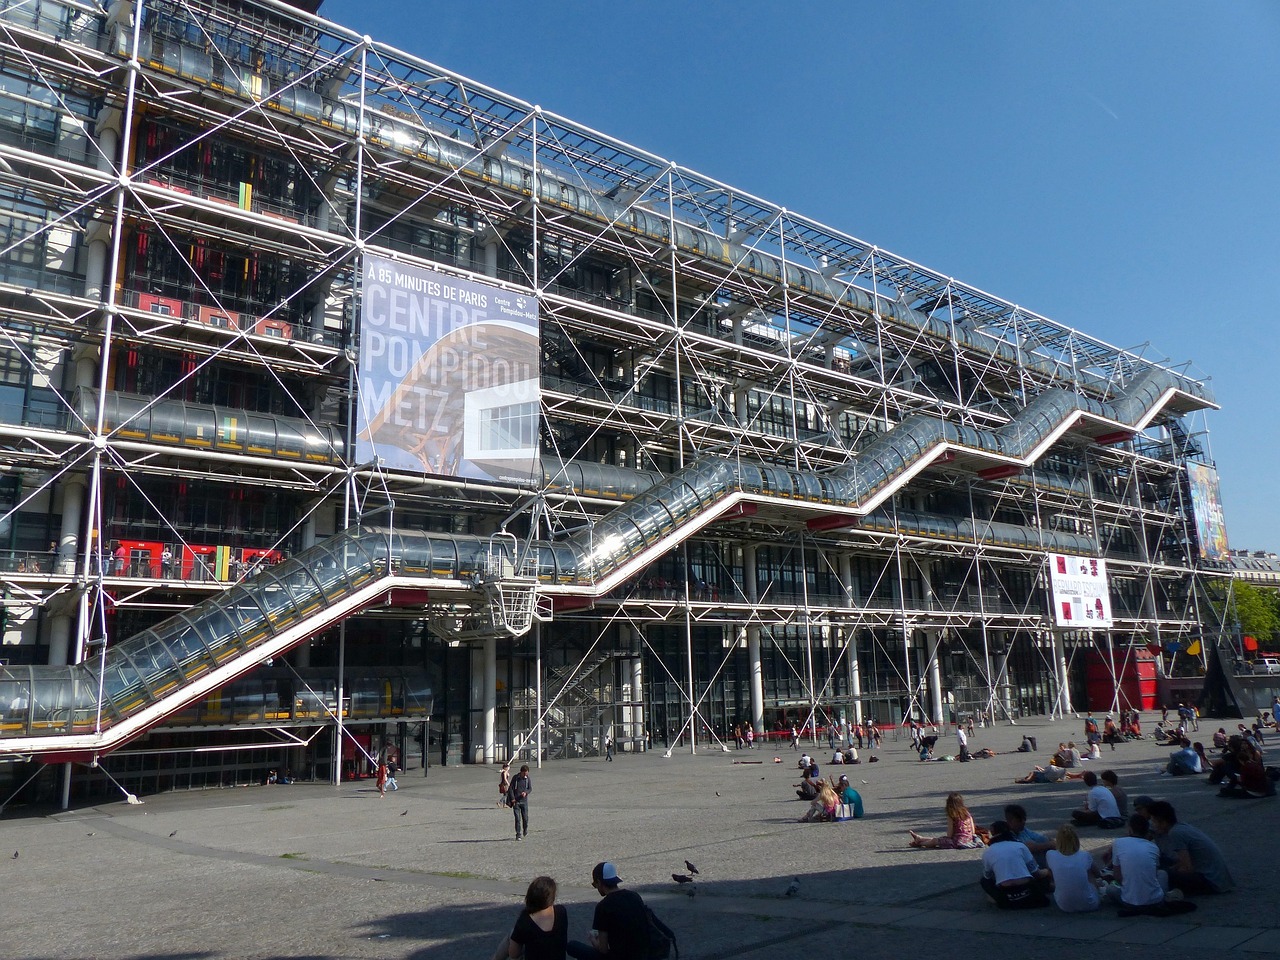 Centre Georges Pompidou with stairs and people sitting on the ground